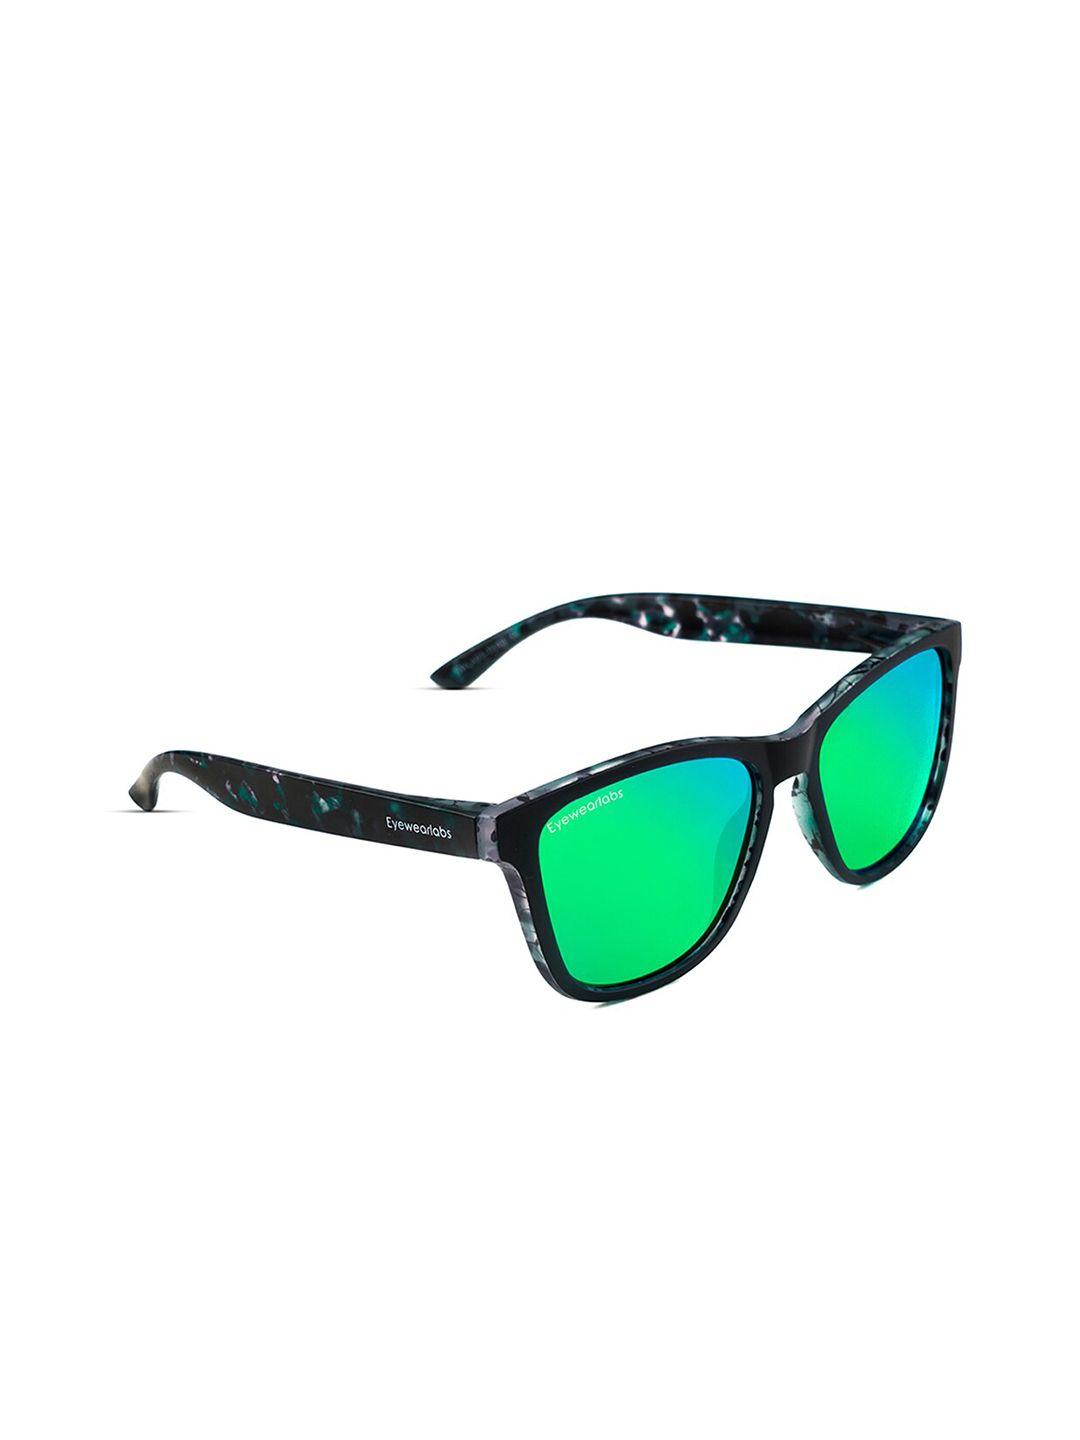 eyewearlabs cateye sunglasses with polarised and uv protected lens